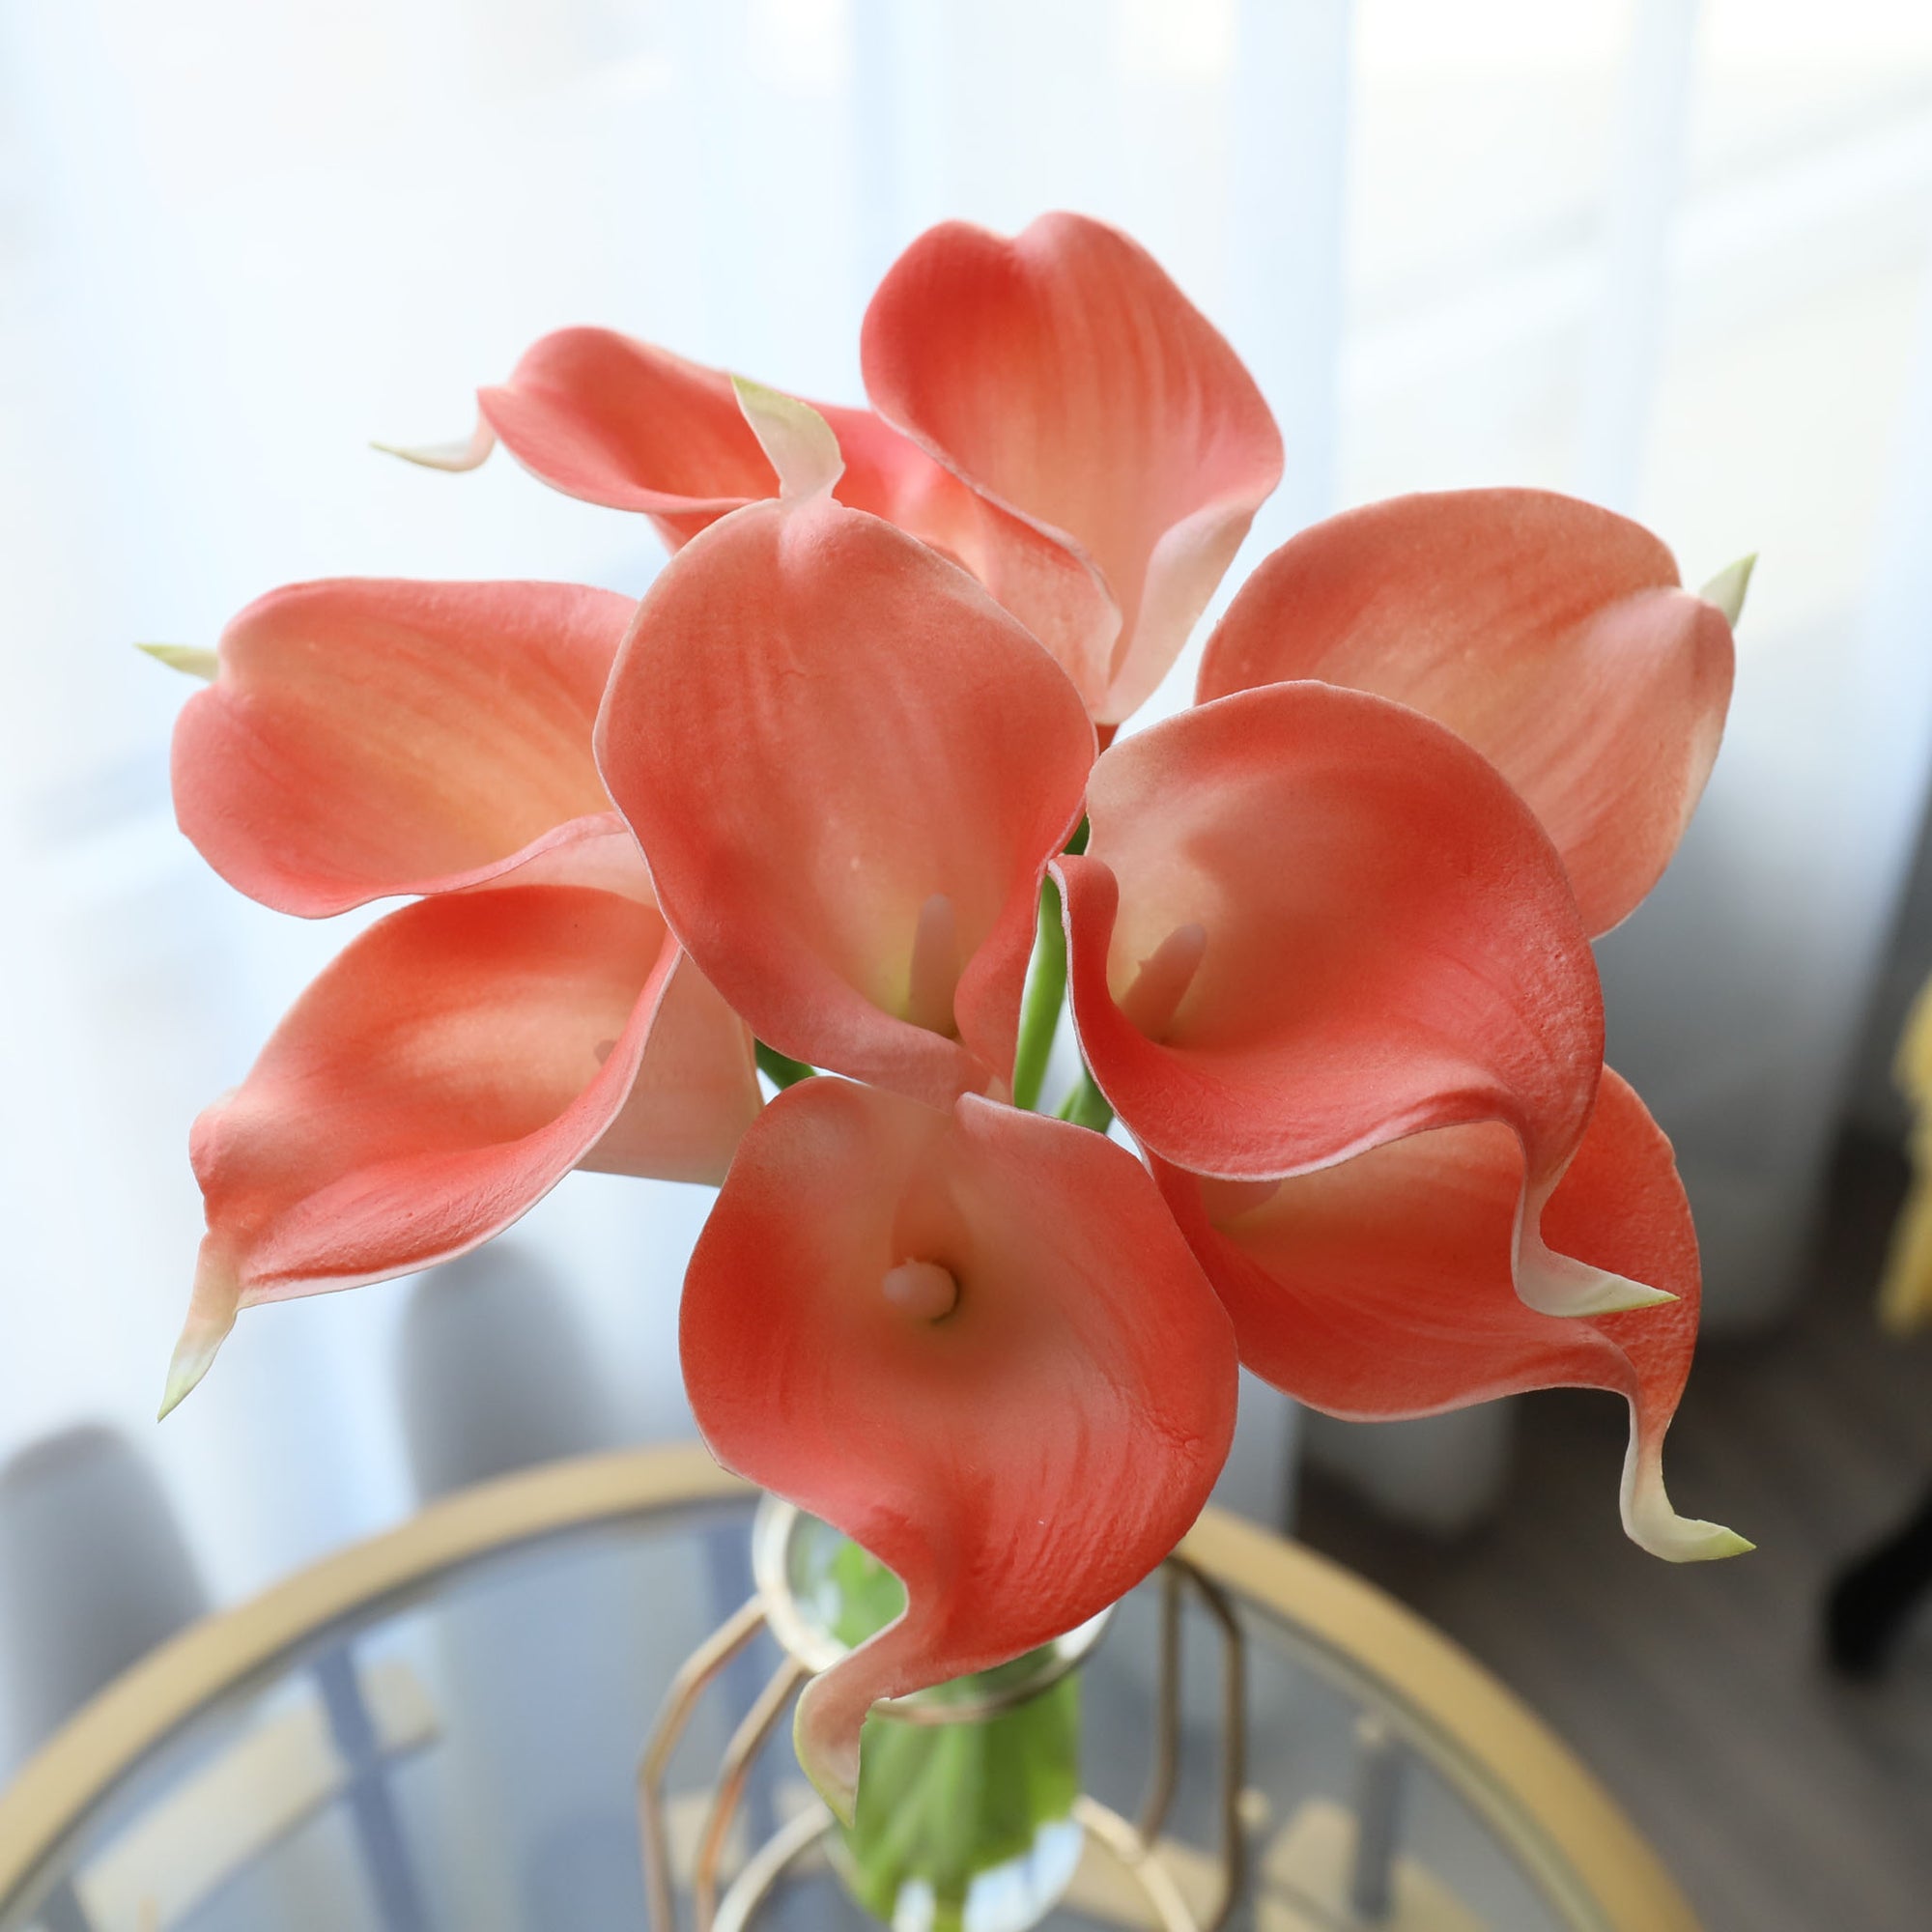 Coral Calla Lily Bouquet Artificial Flowers Wedding